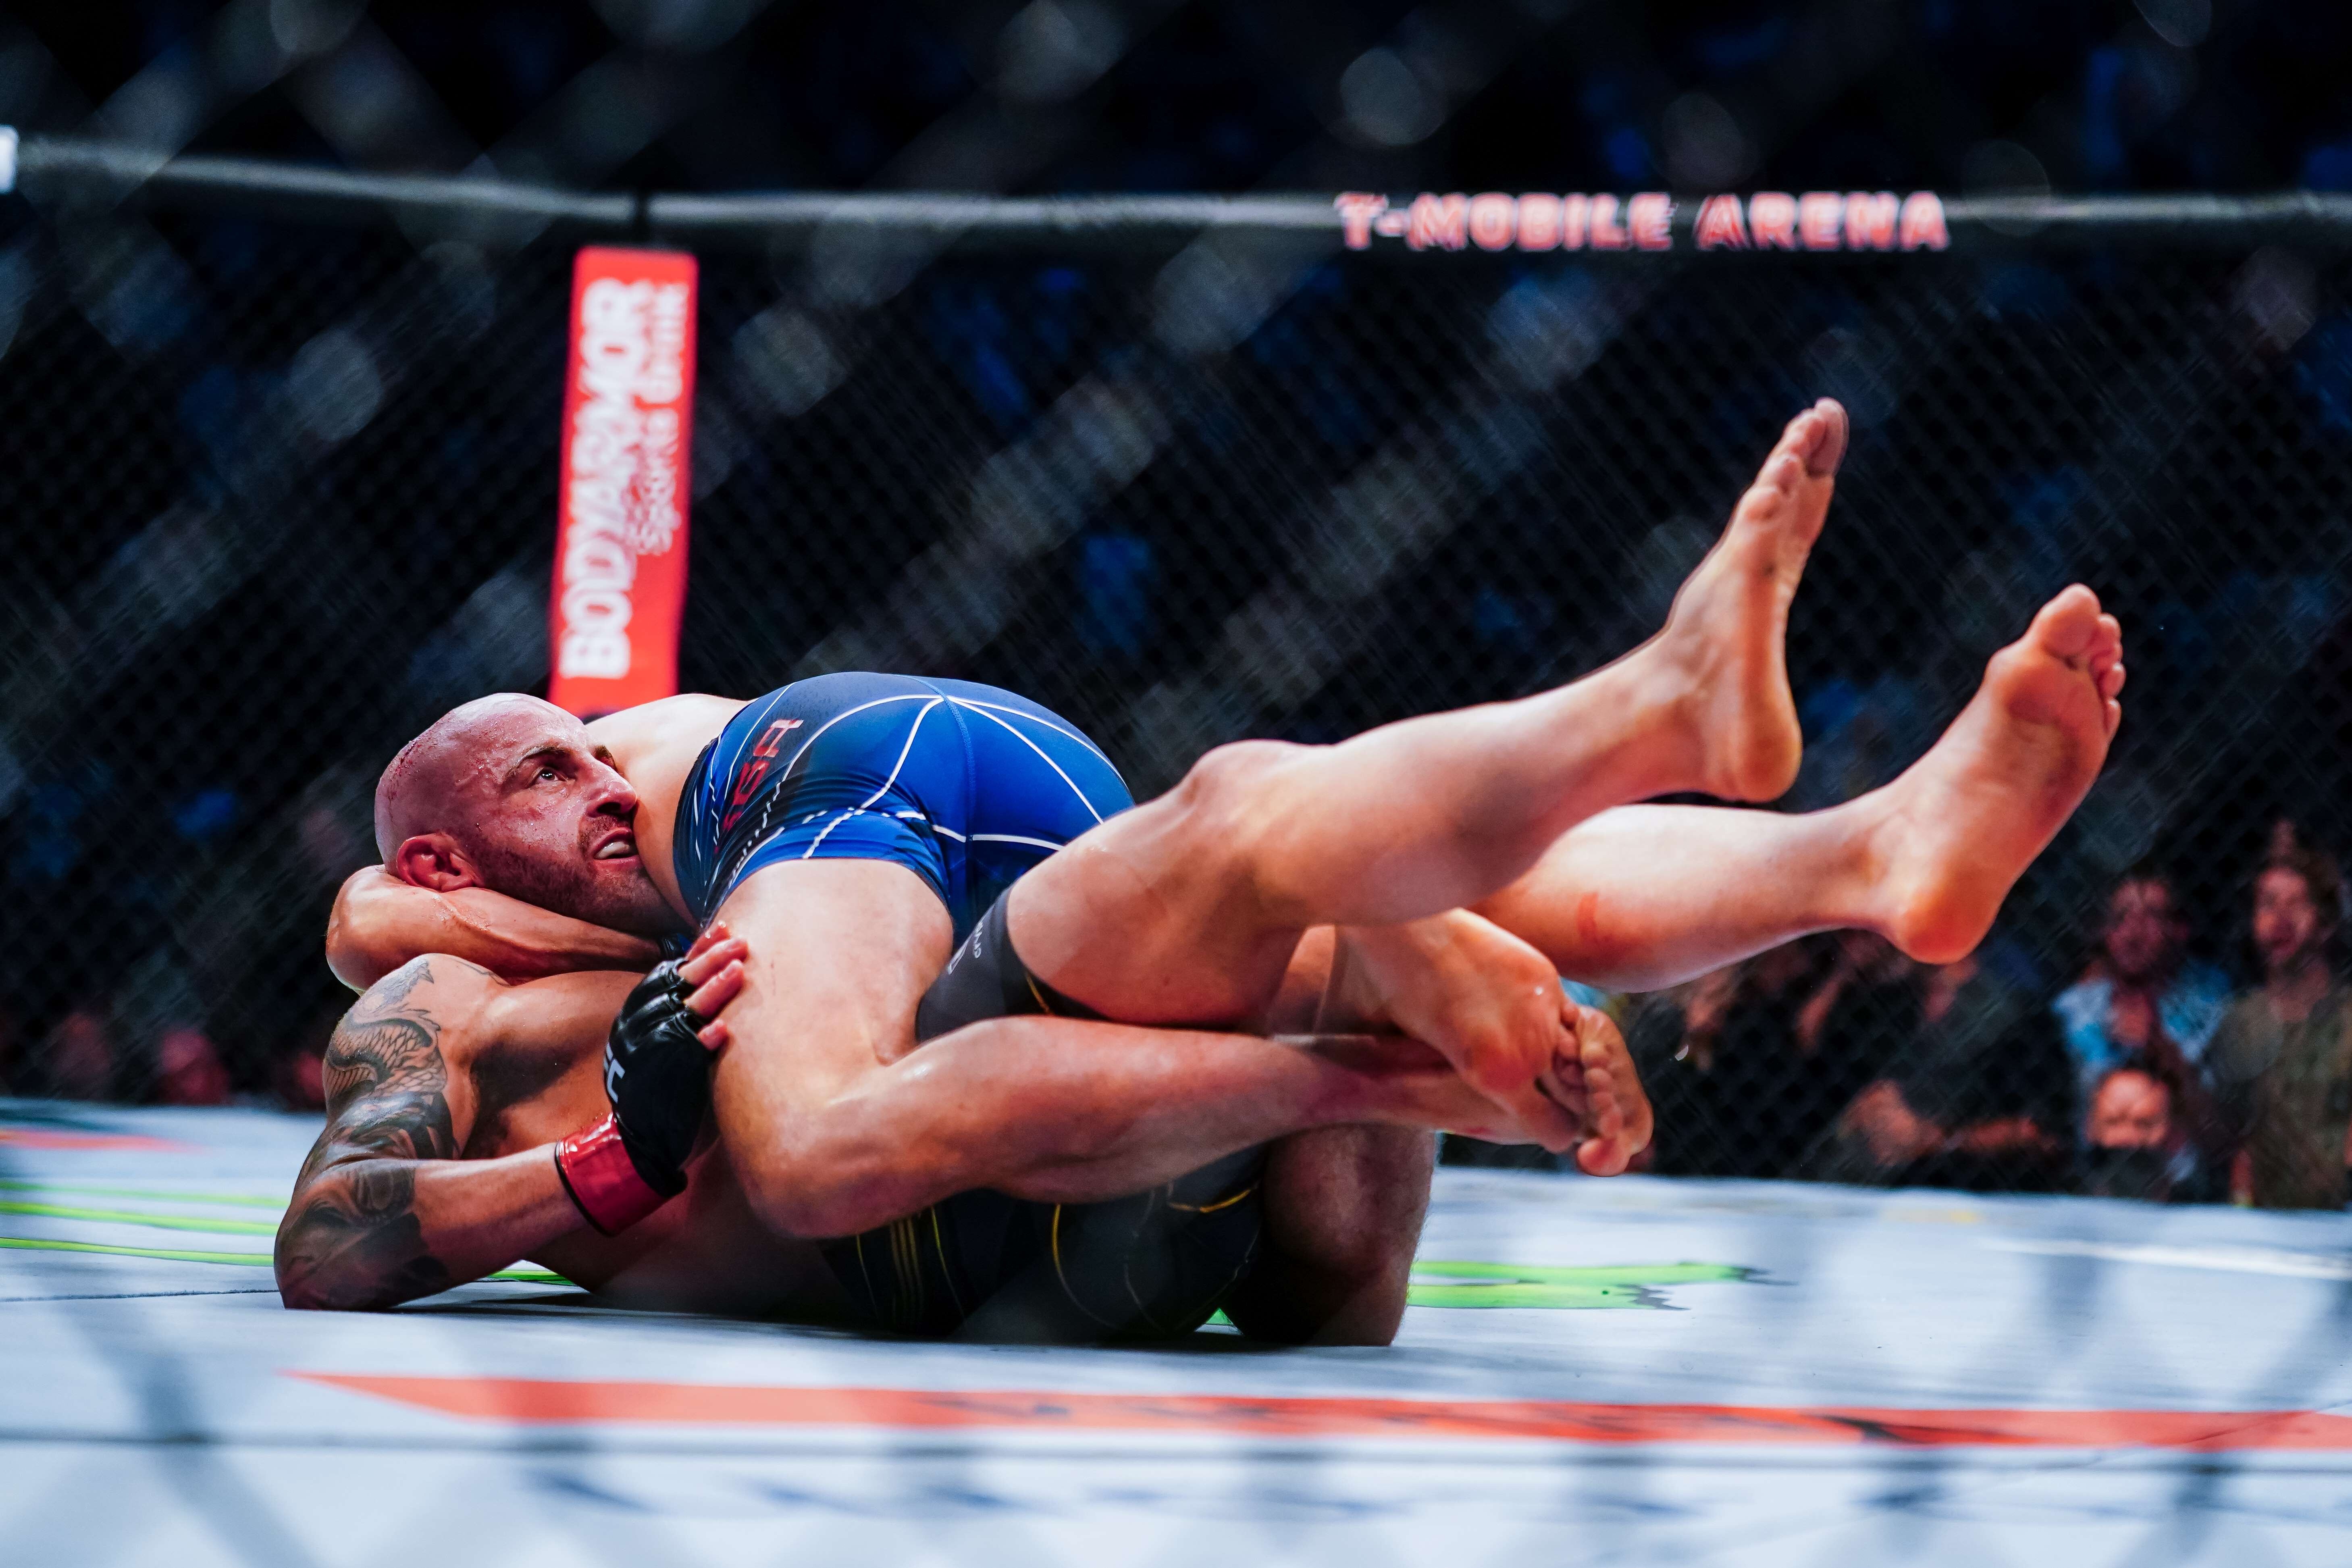 Ultimate submissions: Breaking down the guillotine choke 